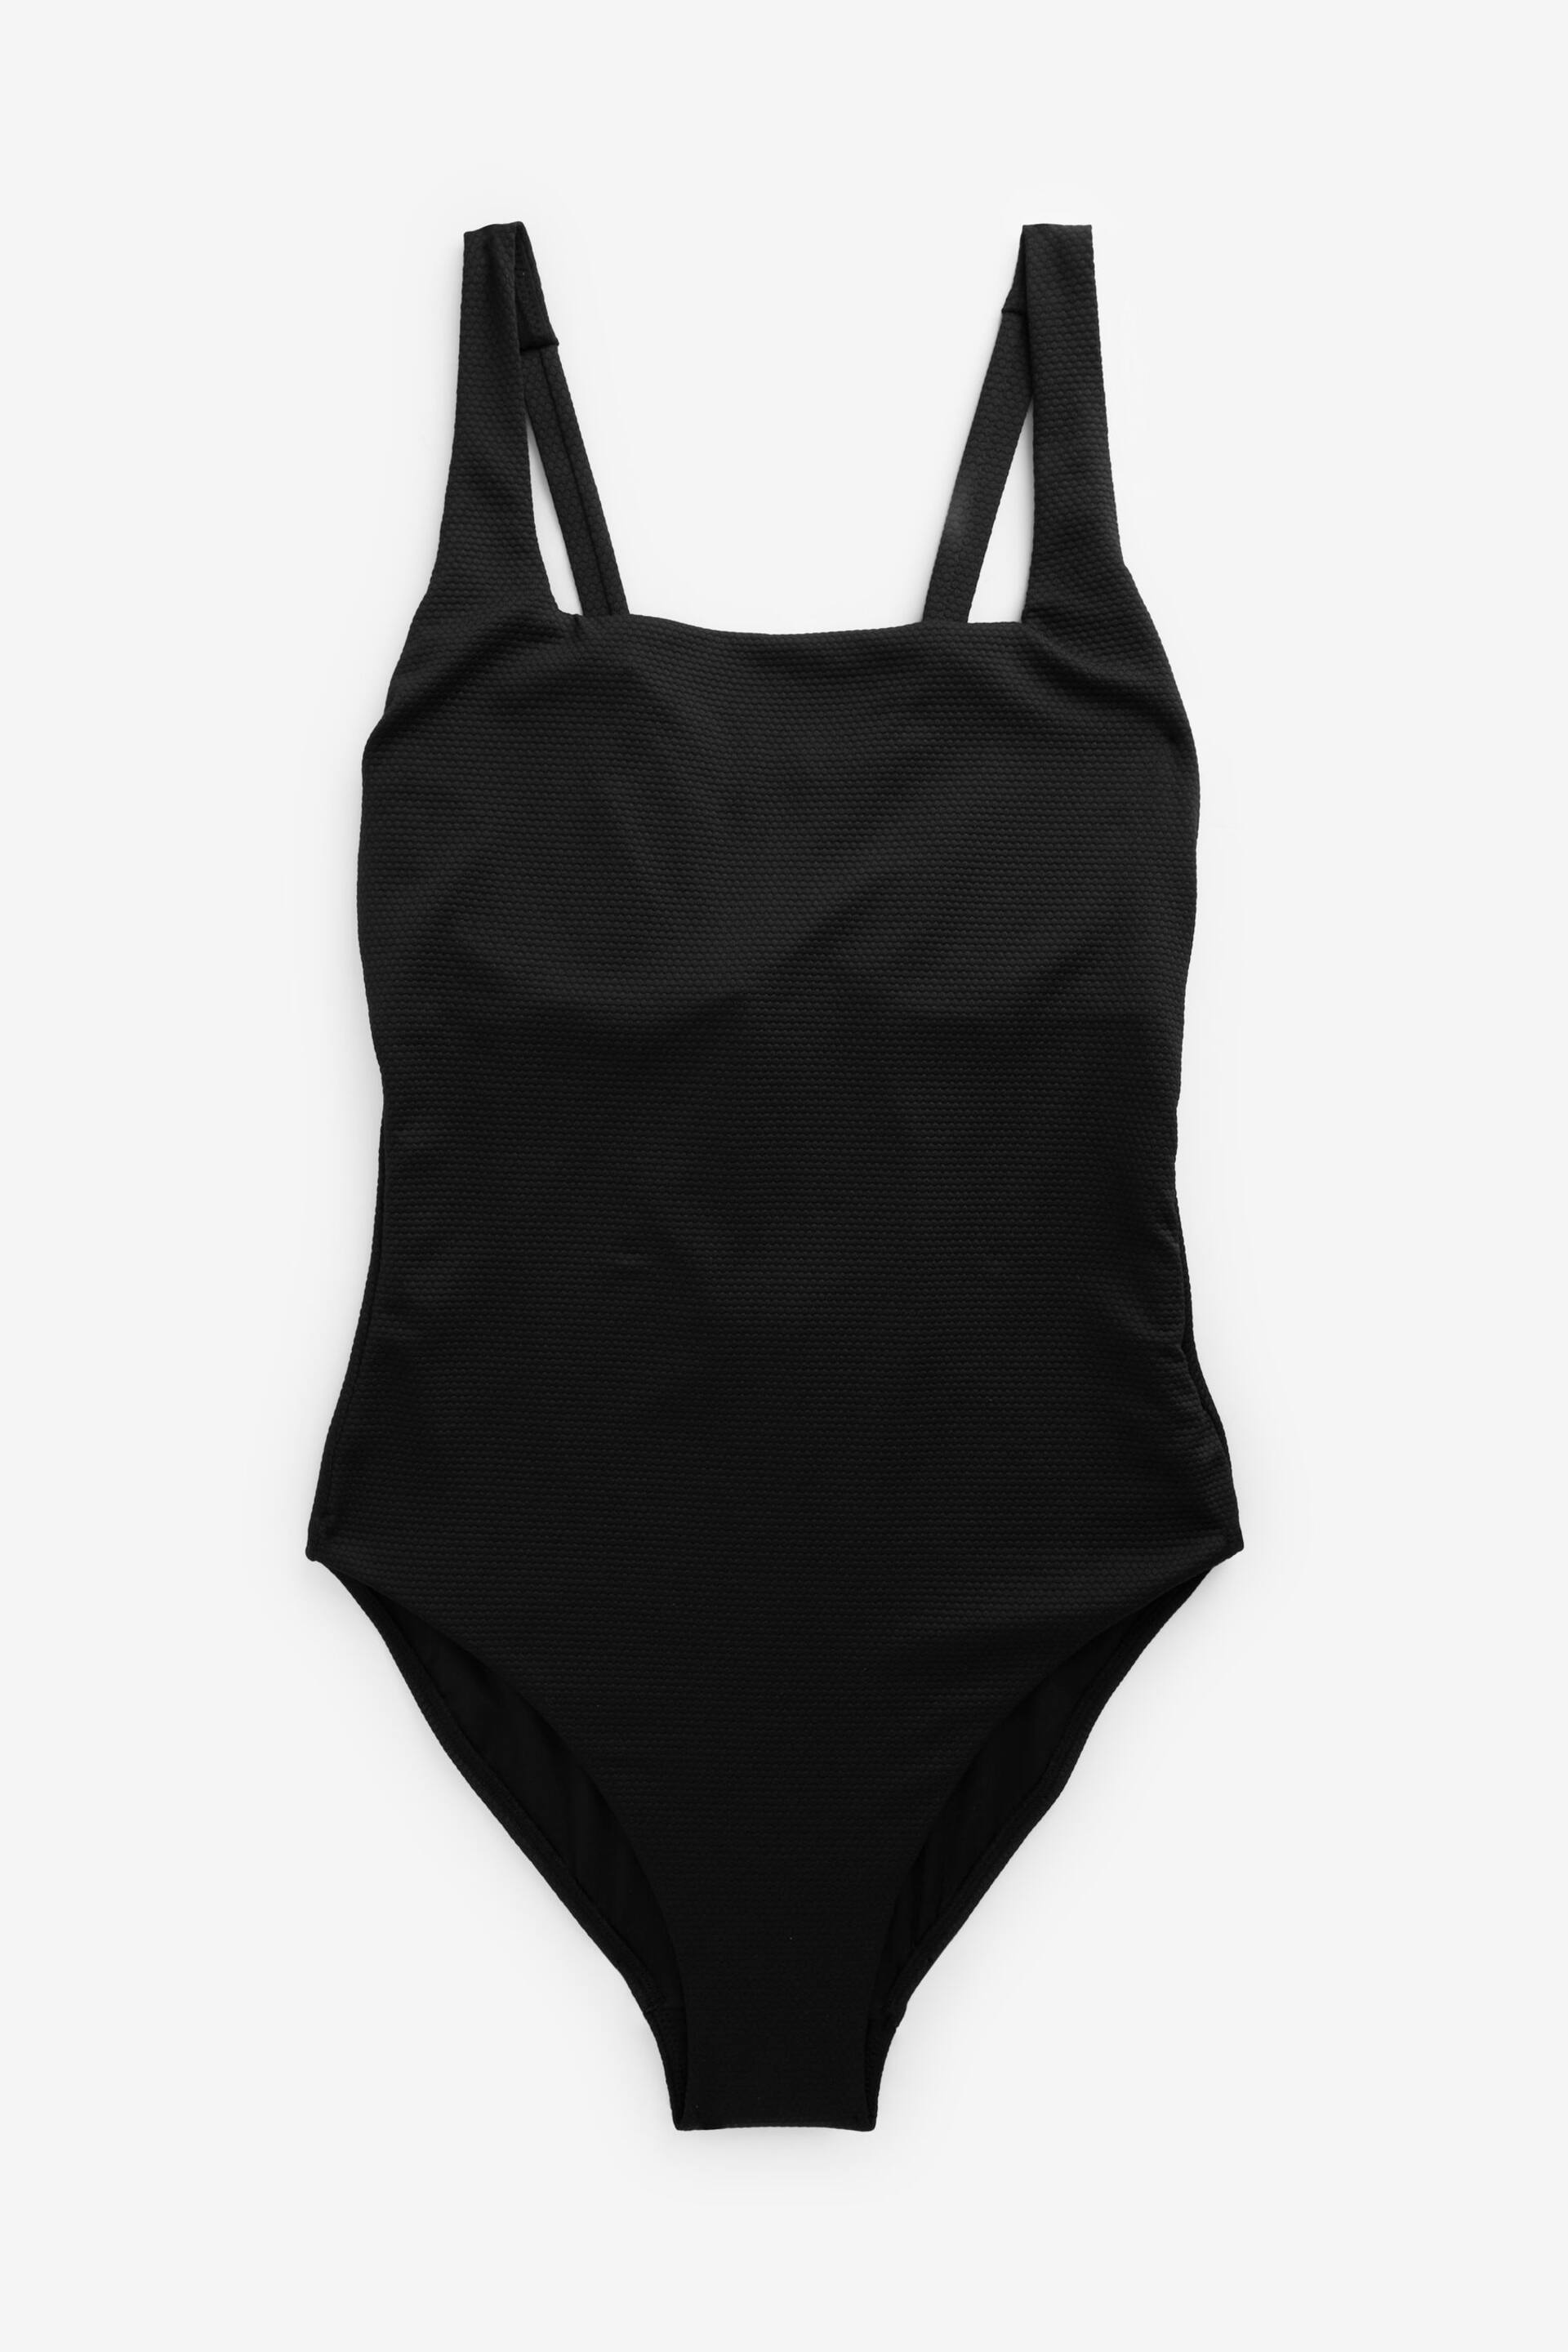 Black Textured Tummy Control DD+ Square Neck Swimsuit - Image 6 of 6